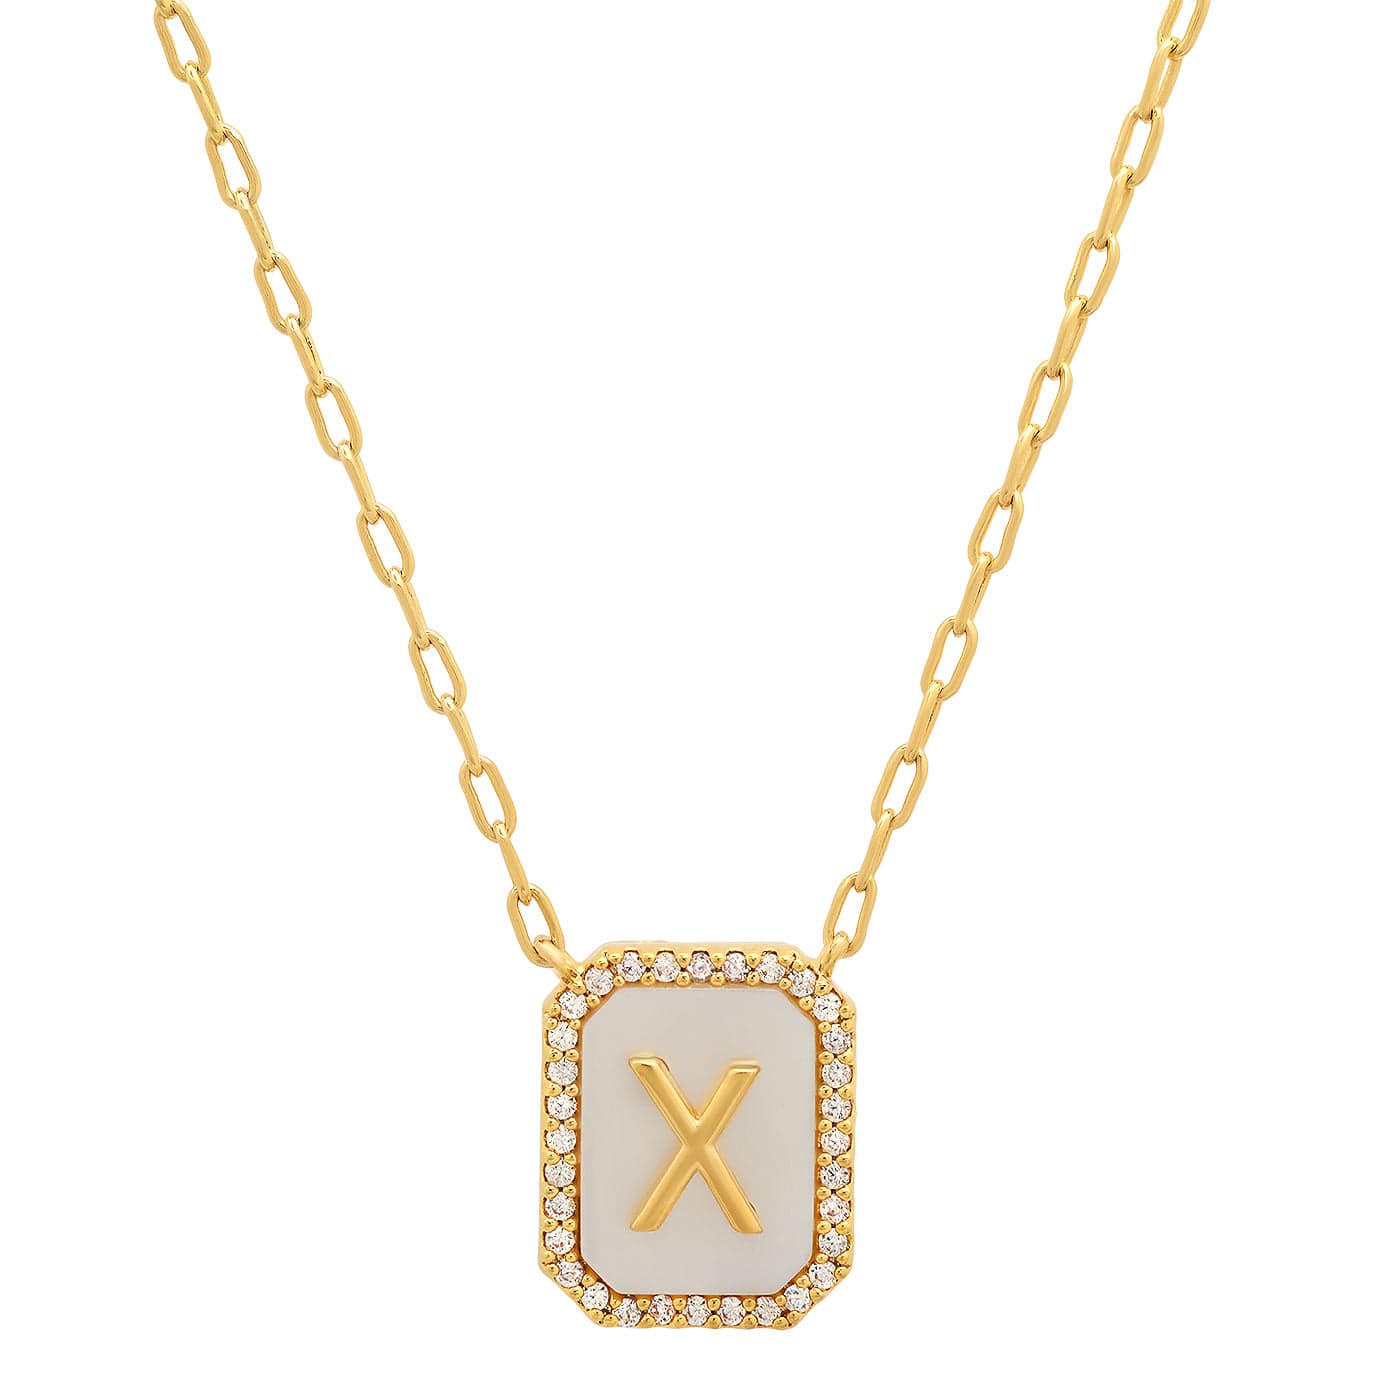 TAI JEWELRY Necklace X Mother Of Pearl Monogram Necklace